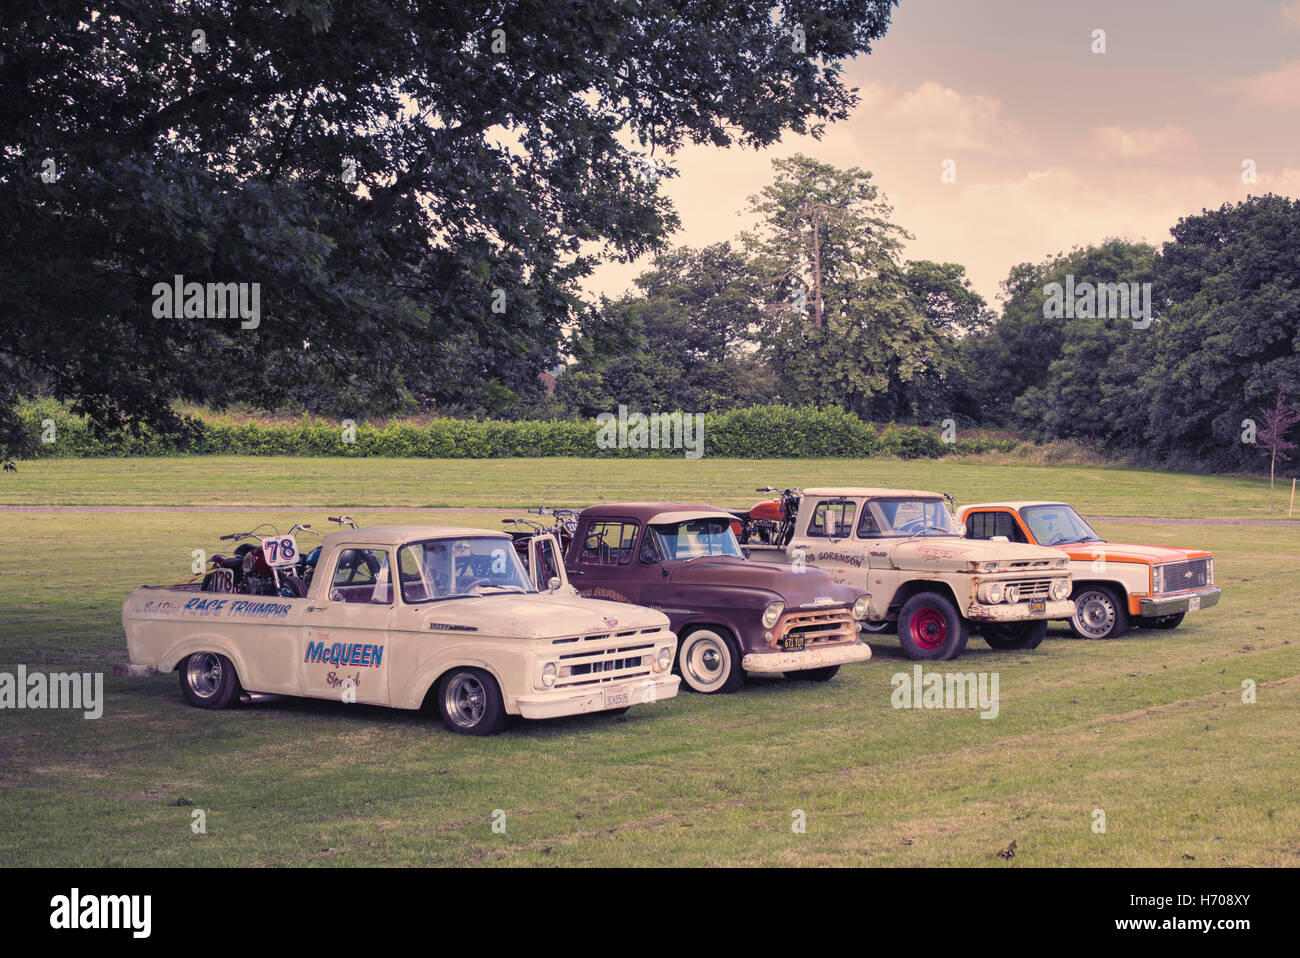 Vintage American pick up trucks at Malle, The Mile Racing event. London. Vintage / Retro filter applied Stock Photo